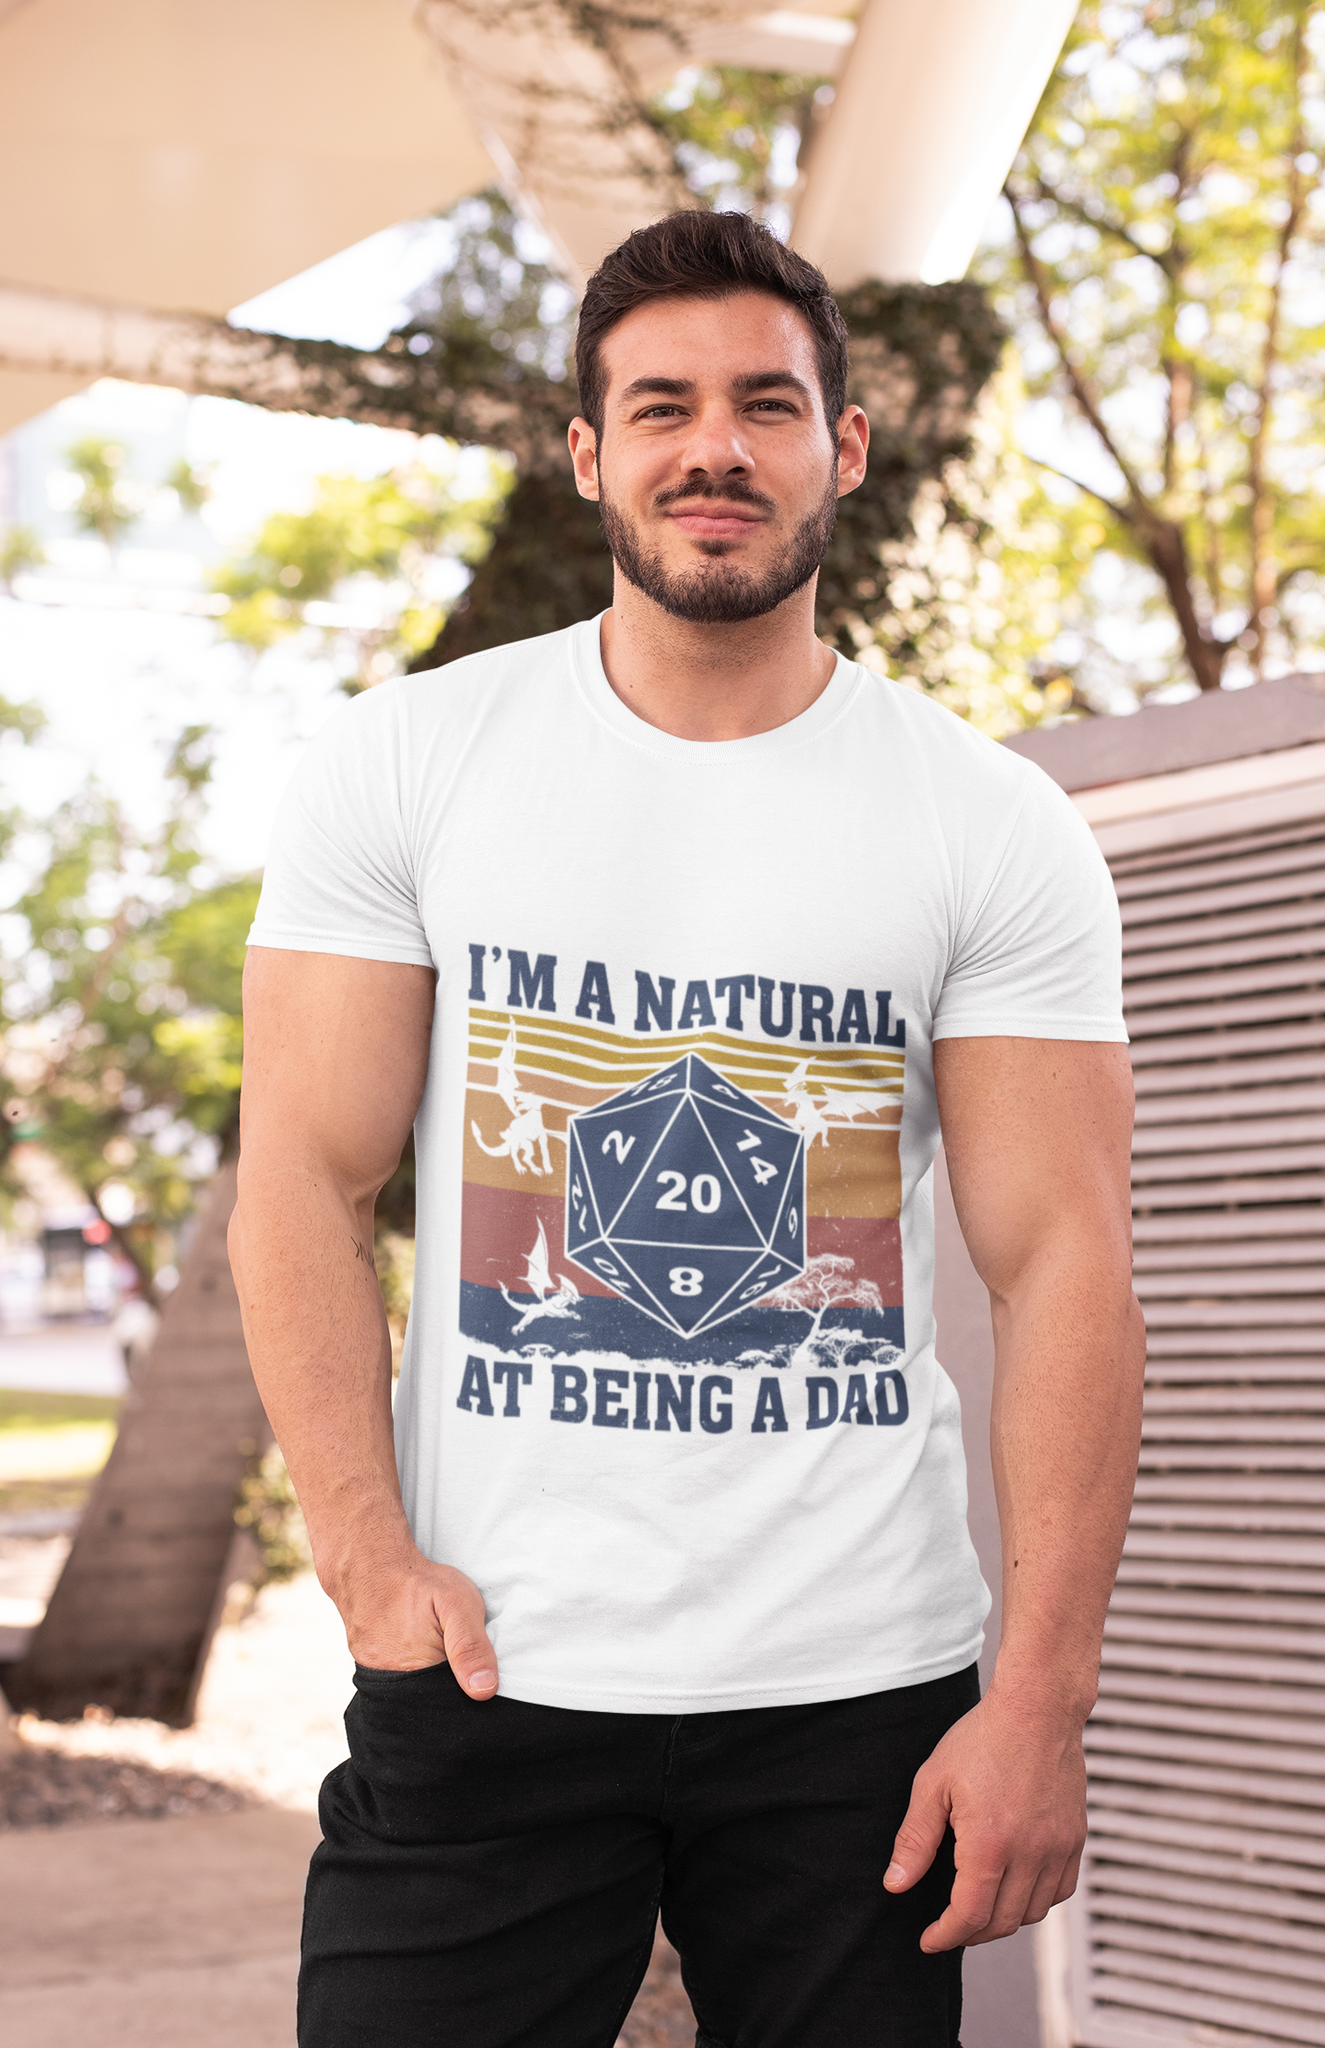 Dungeon And Dragon Vintage T Shirt, RPG Dice Games Tshirt, Im A Natural At Being A Dad DND T Shirt, Father Day Gifts